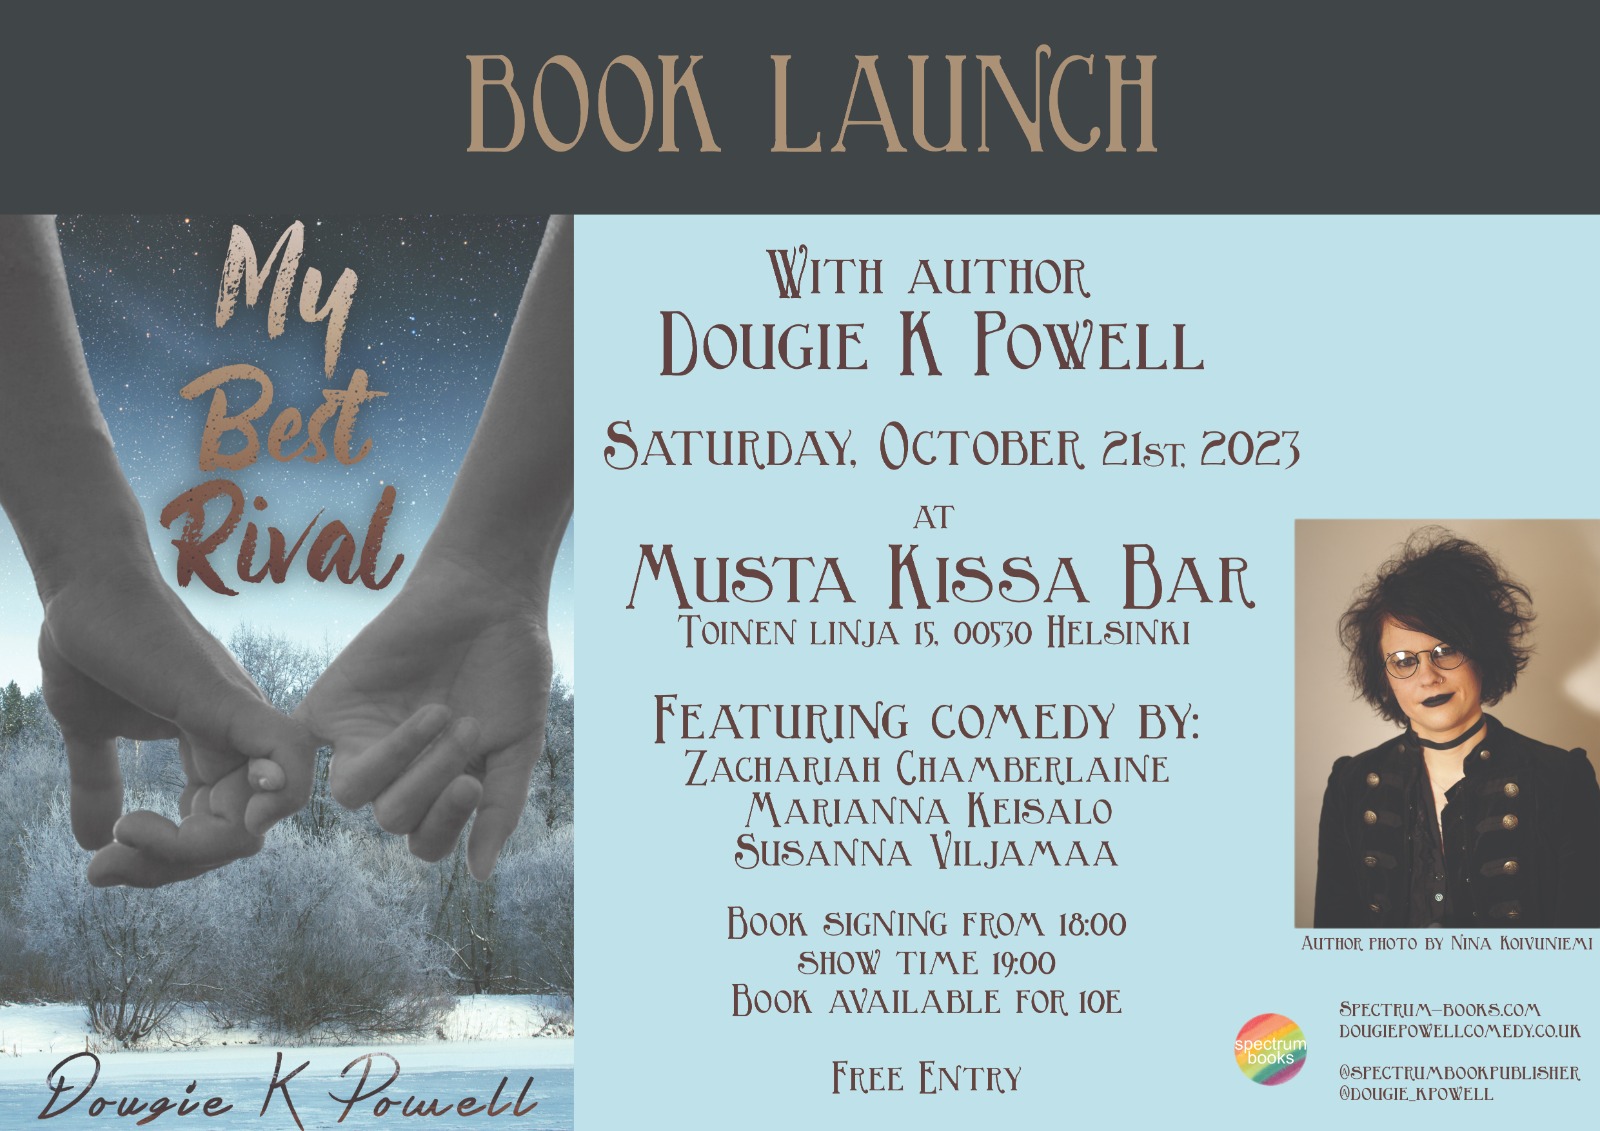 Book Launch! My Best Rival by Dougie K Powell